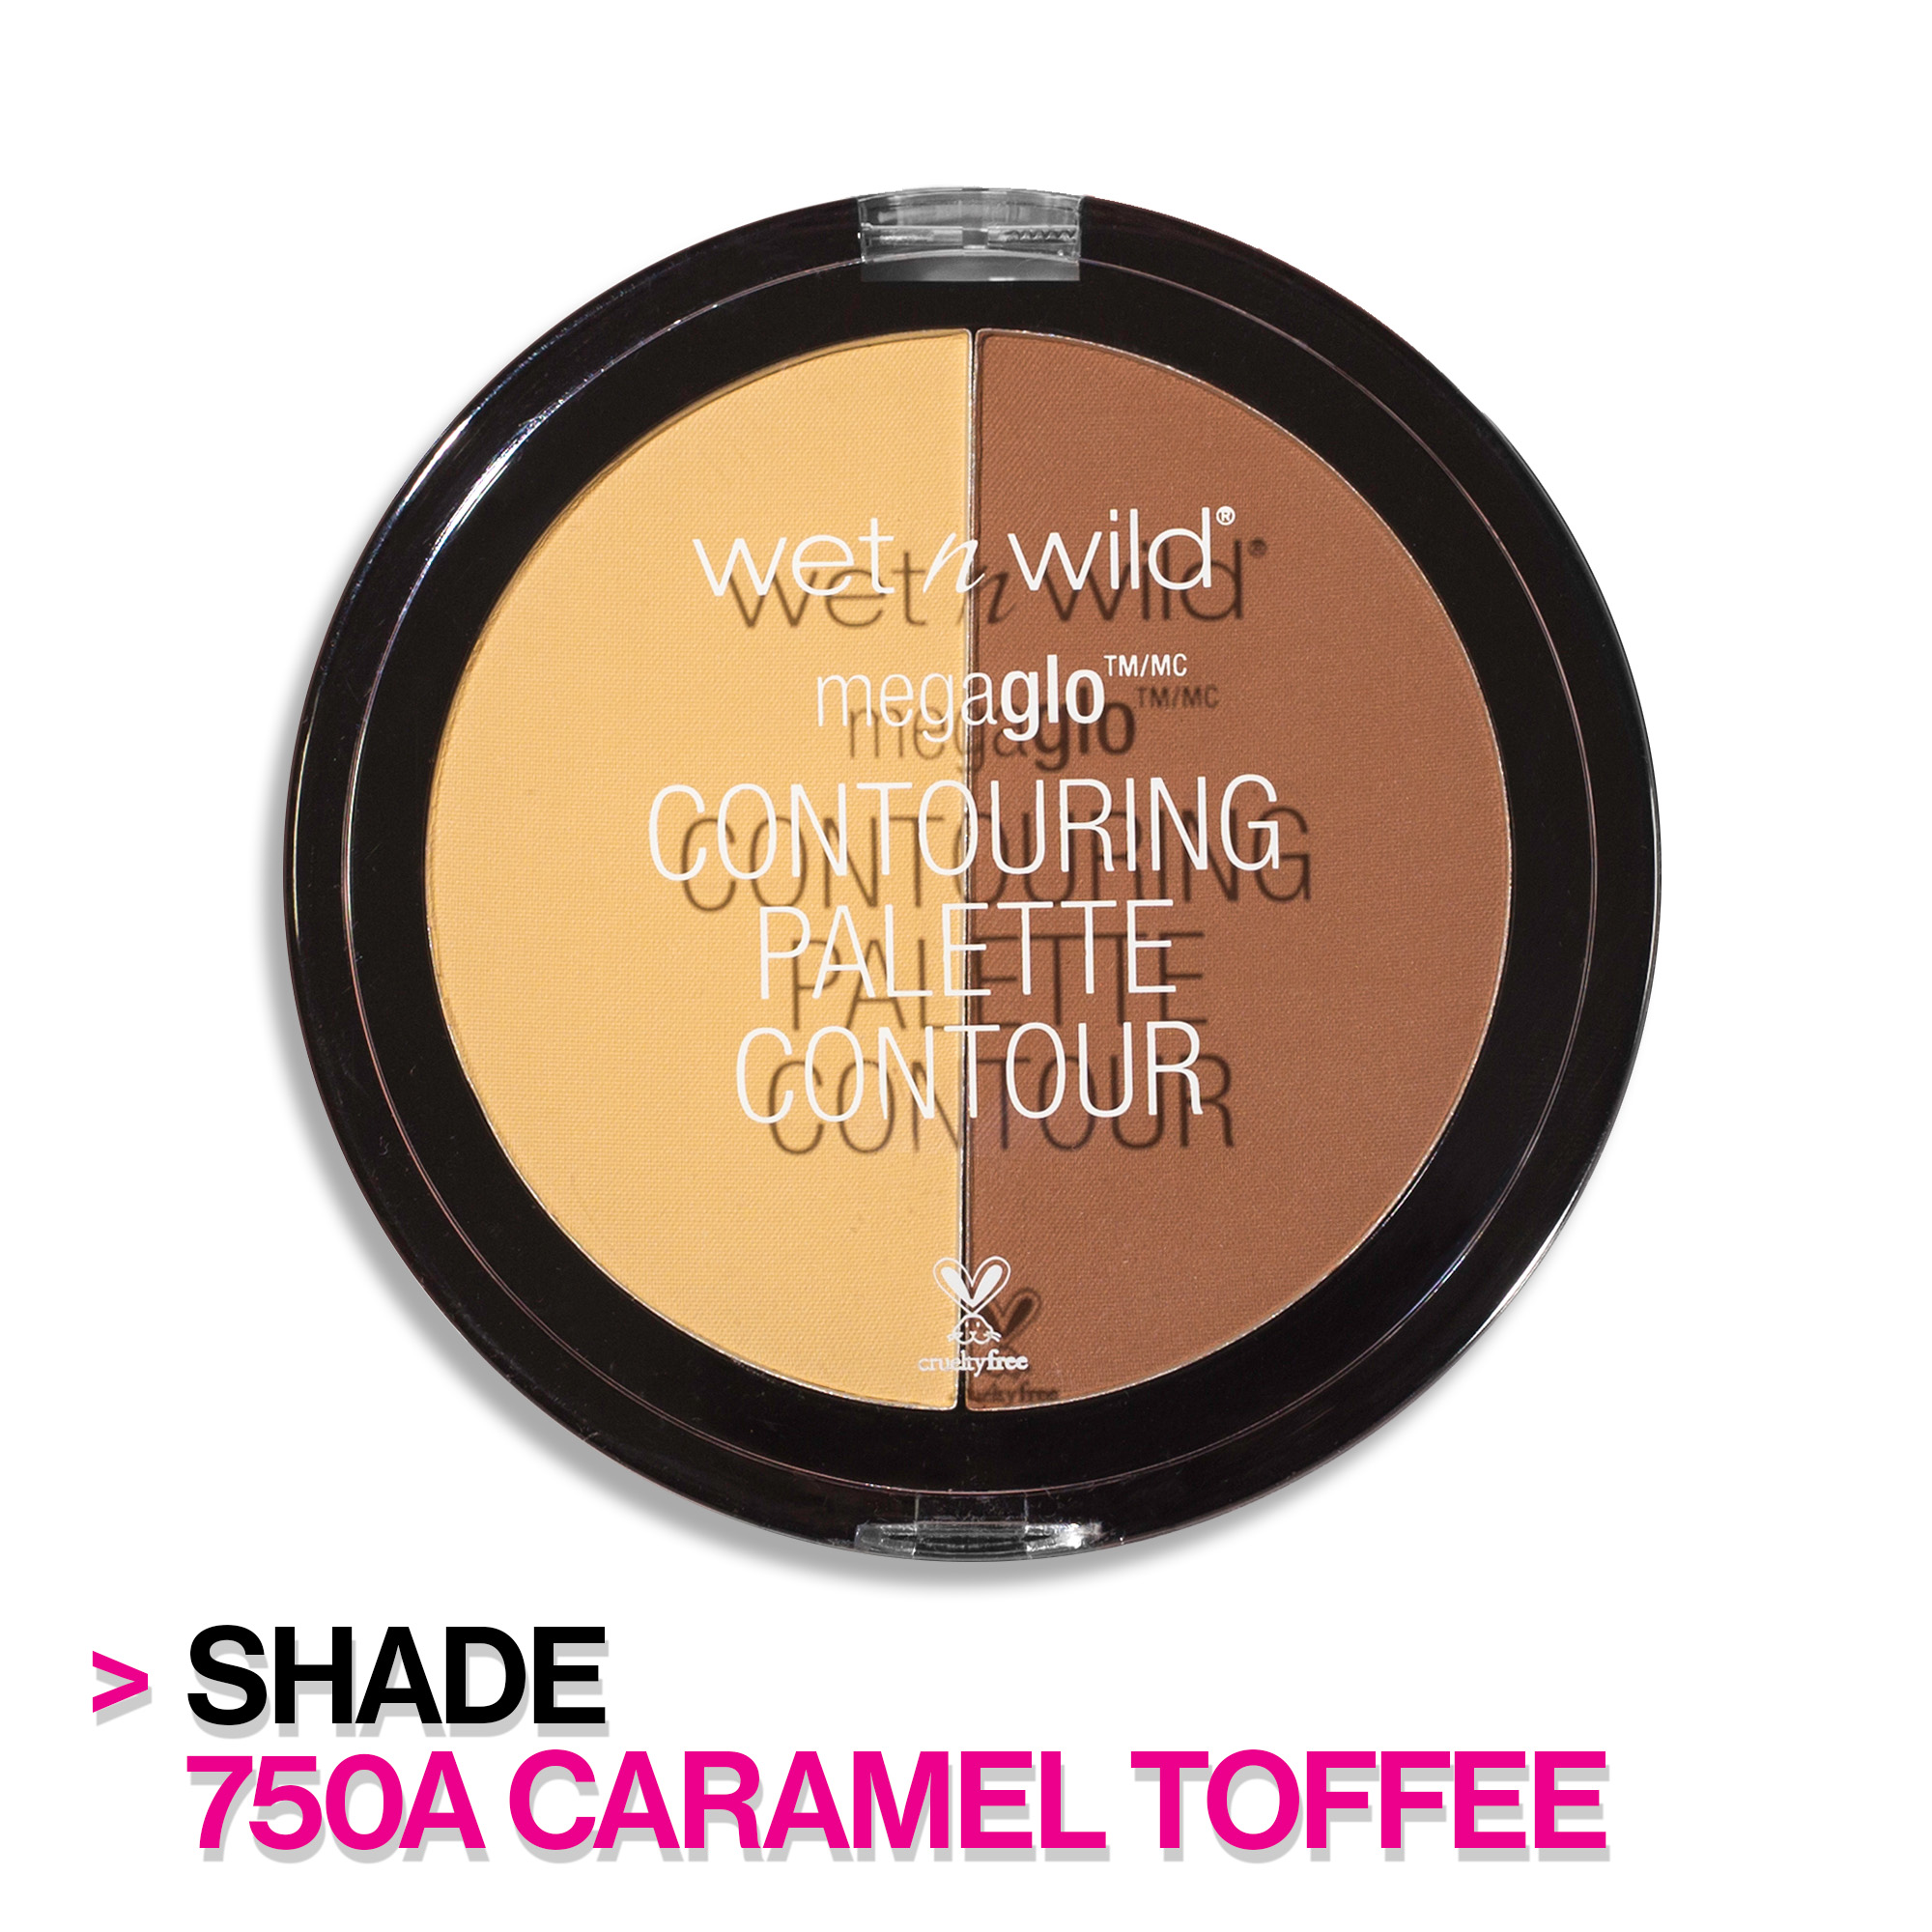 wet n wild MegaGlo Contouring Palette - Caramel Toffee - image 2 of 9